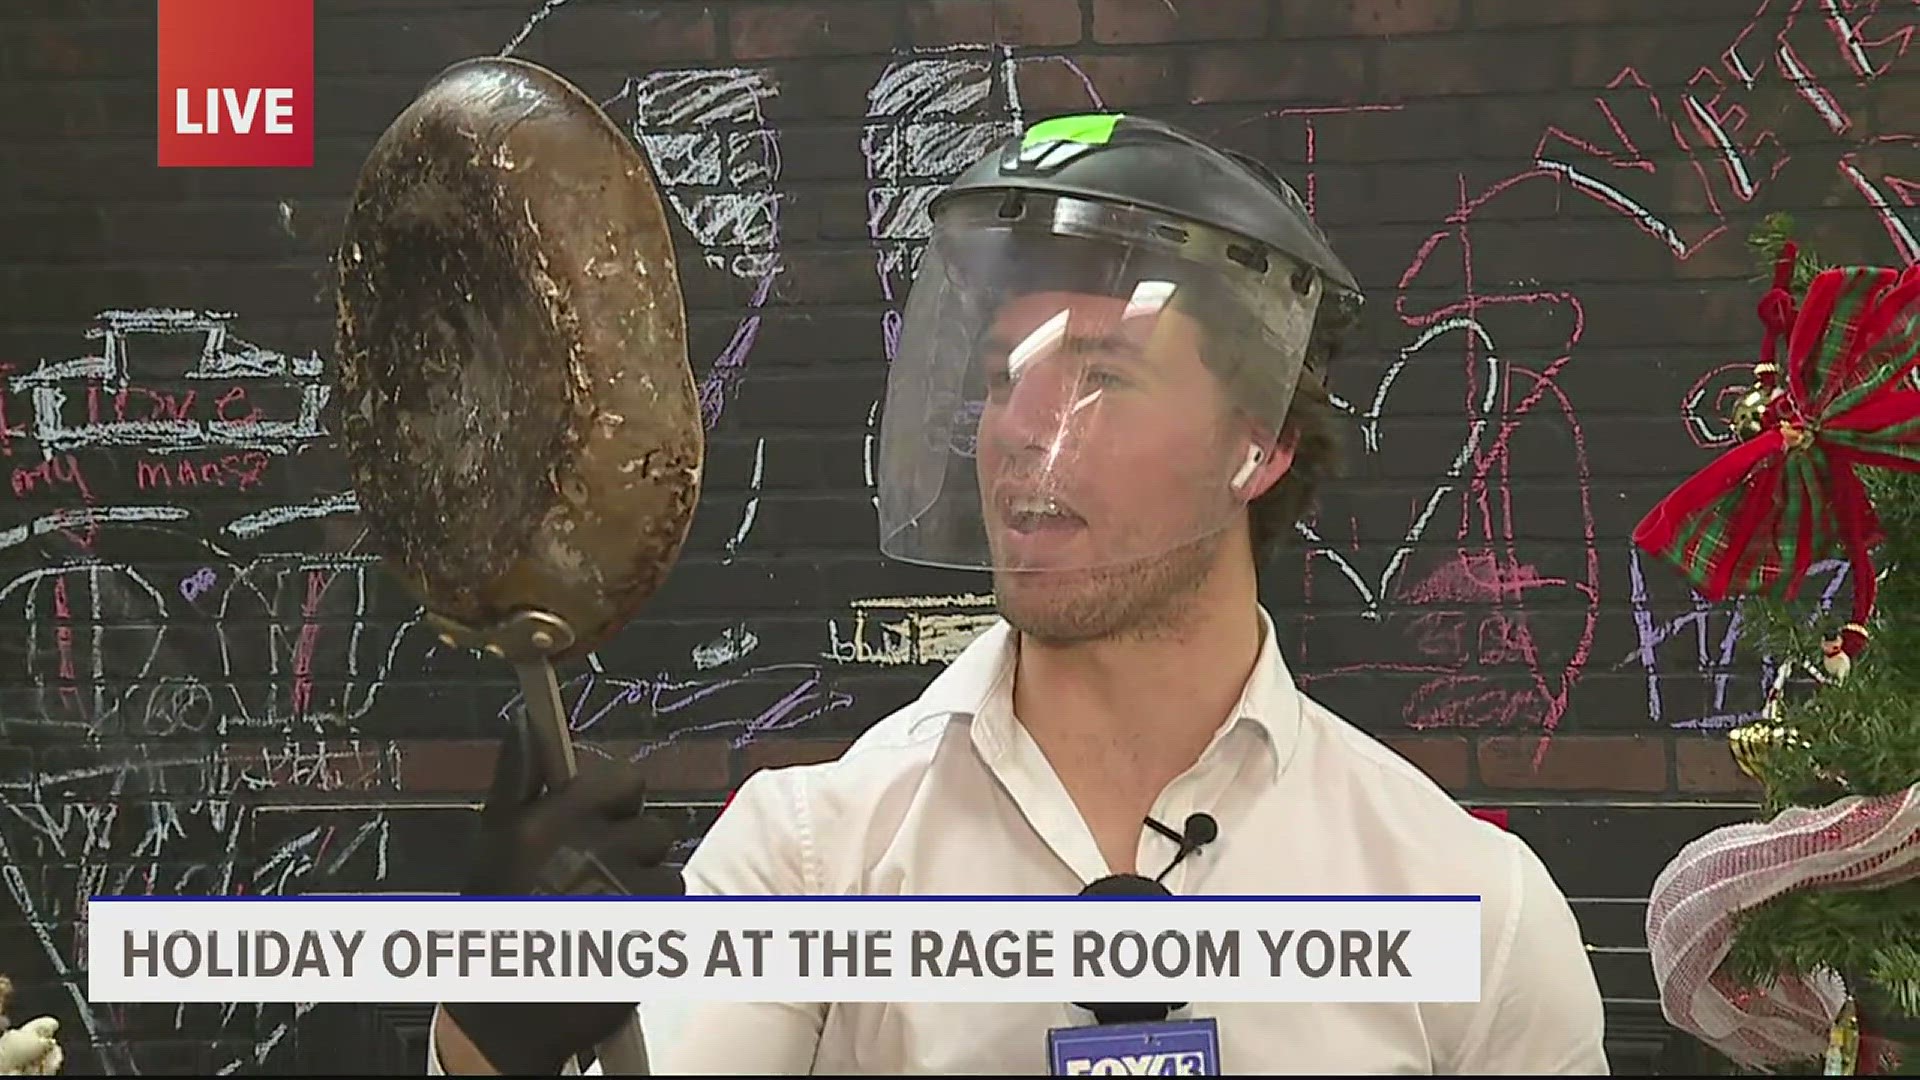 York's Rage Room is the perfect place to work out your holiday frustrations.